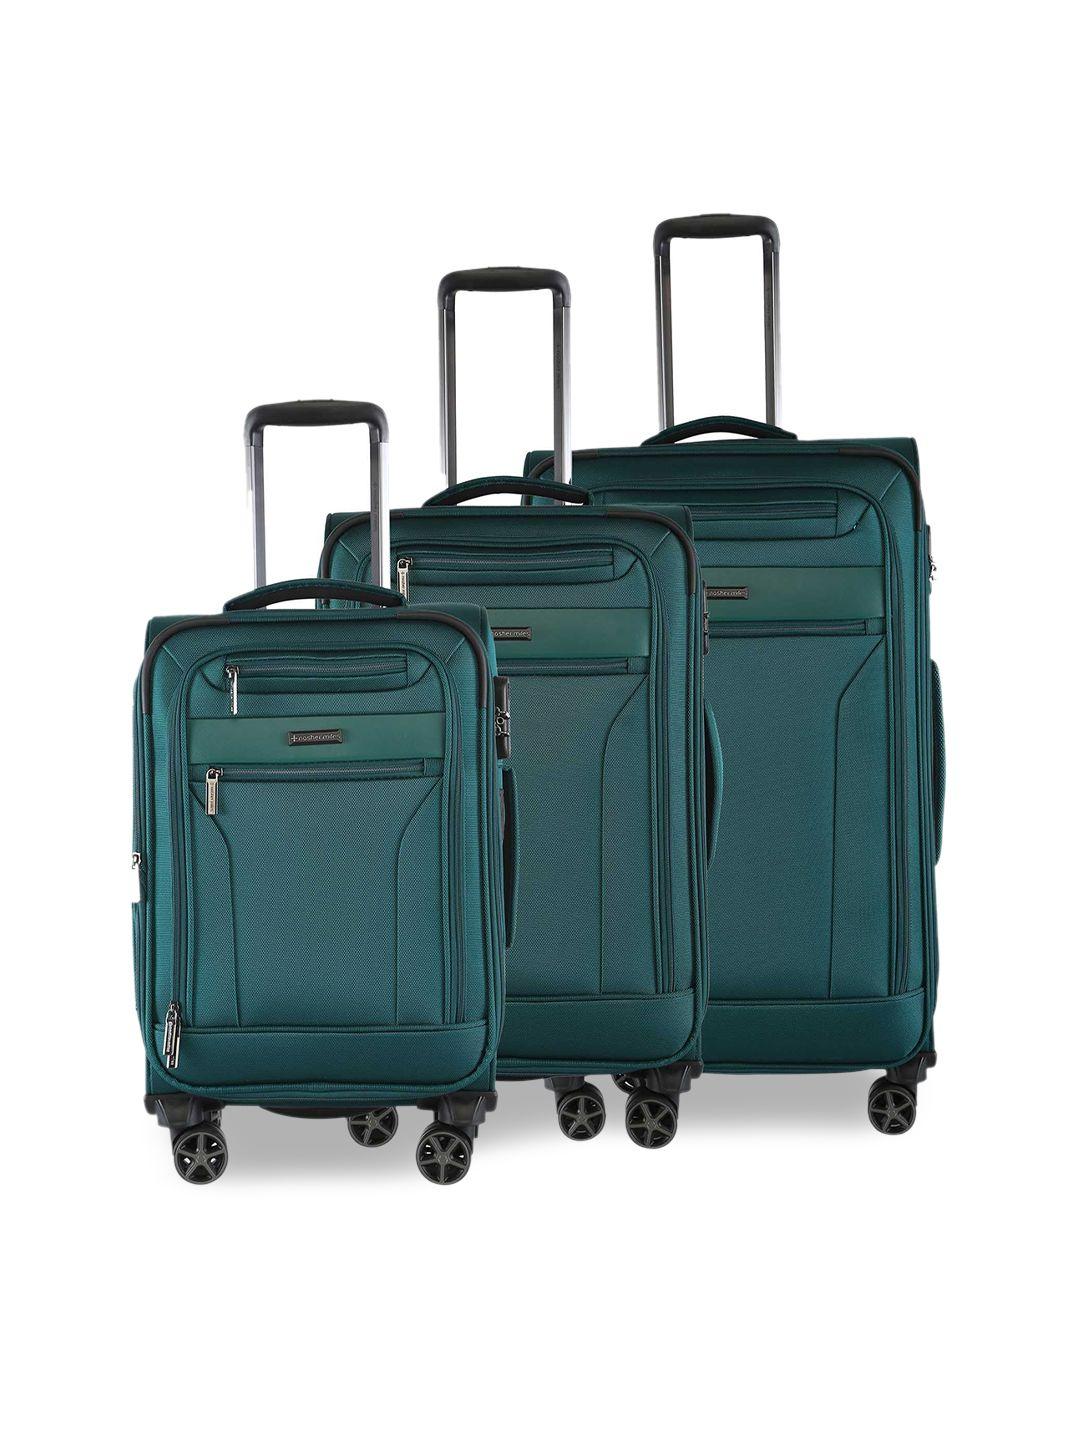 nasher-miles-set-of-3-berlin-expander-soft-trolley-bags